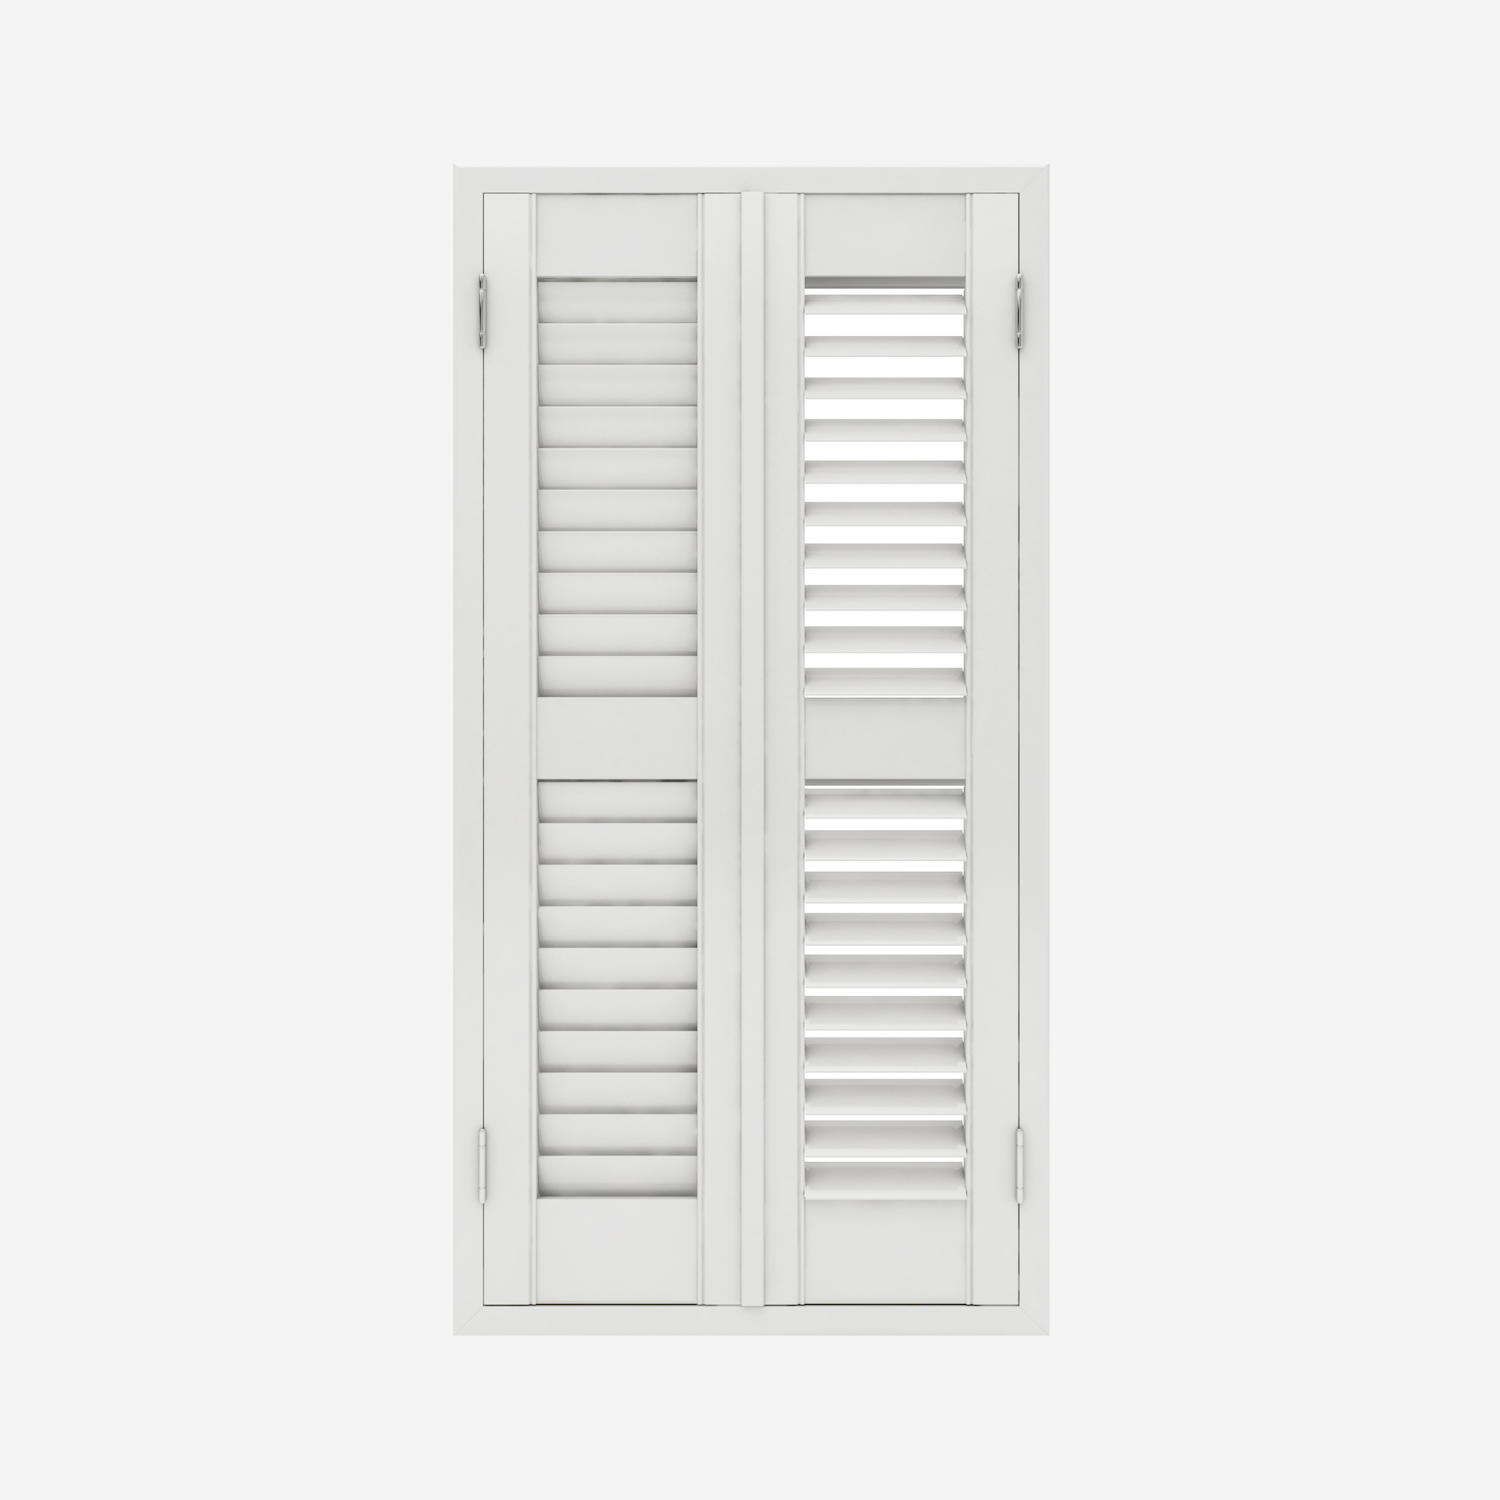 DIY PVC Plantation Shutter – Shutterwise Easykit – Two Panels with D Mold